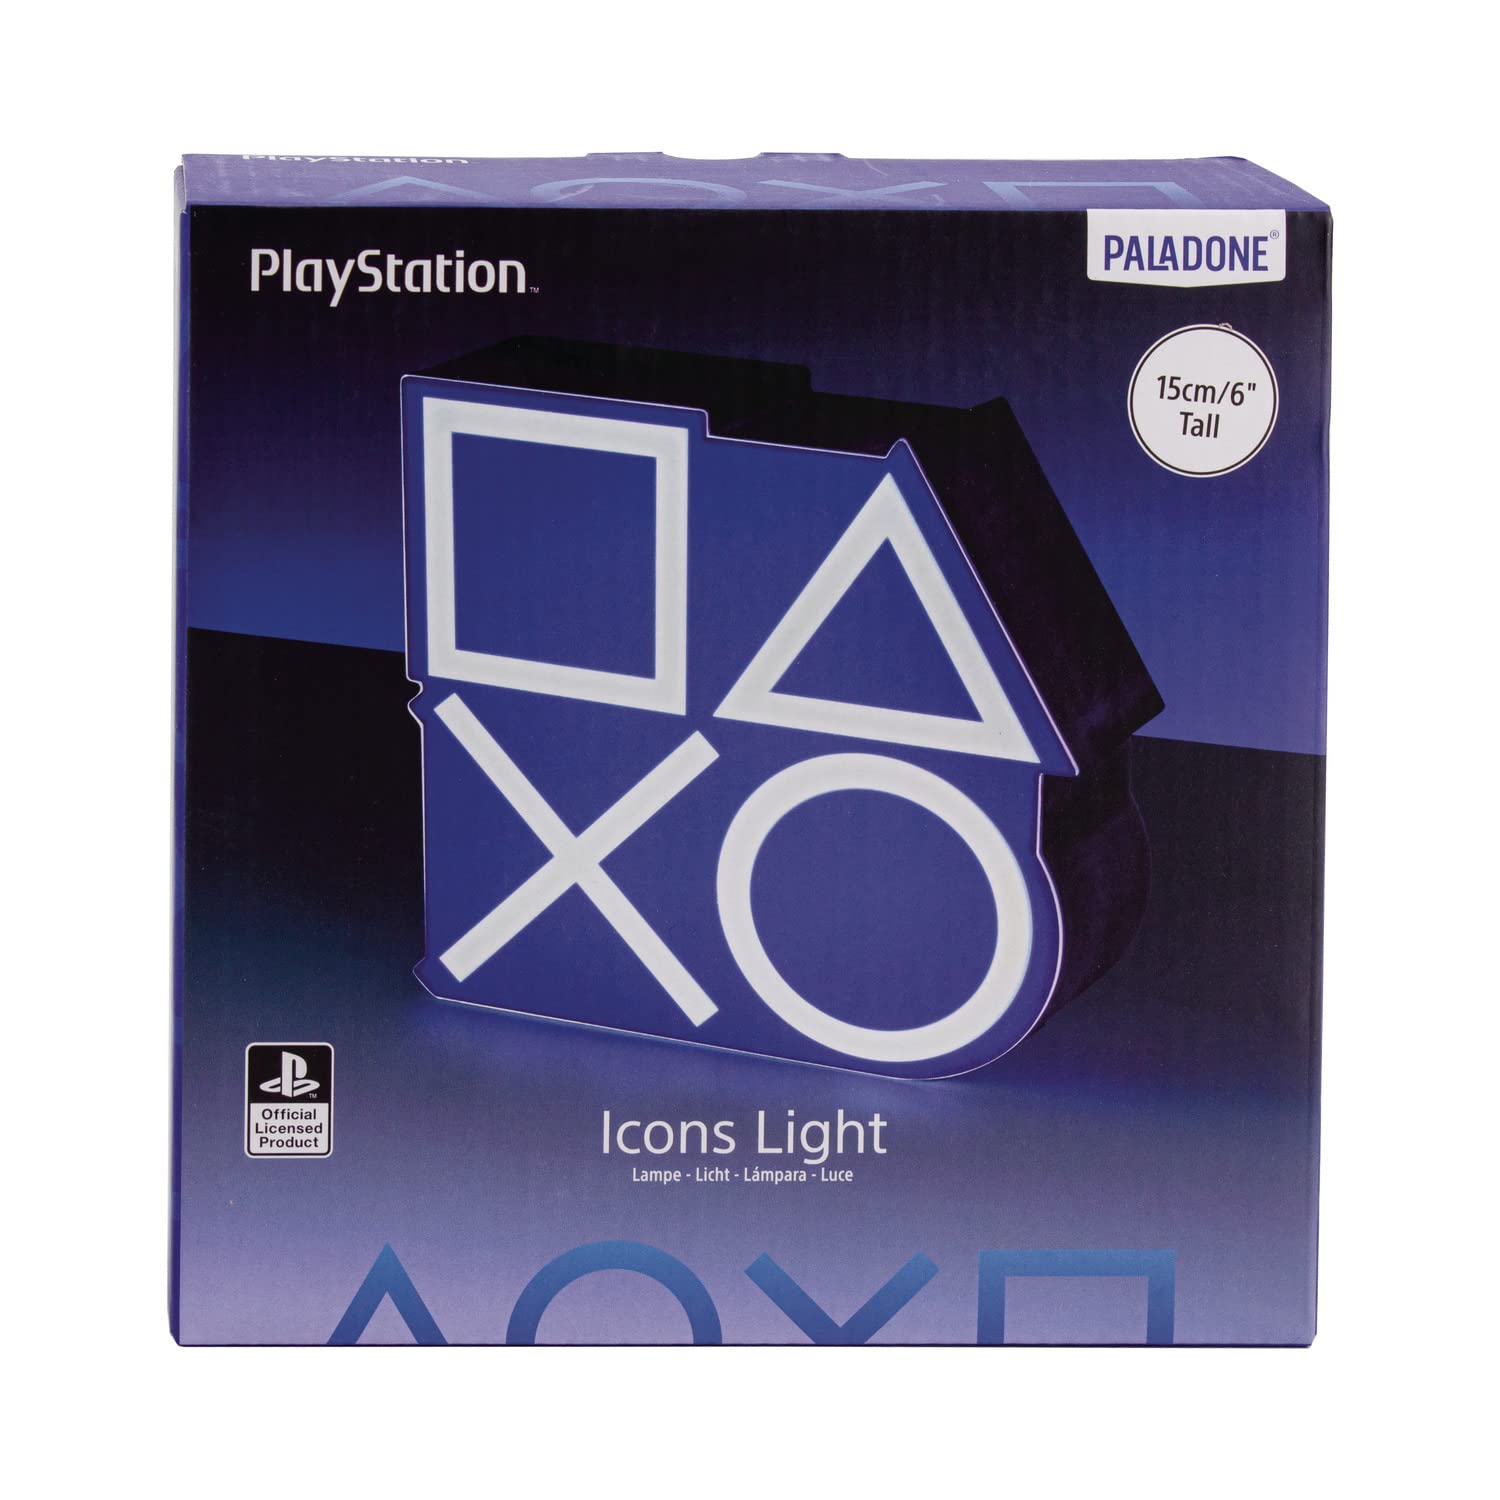 PLAYSTATION 2D ICONS LIGHT